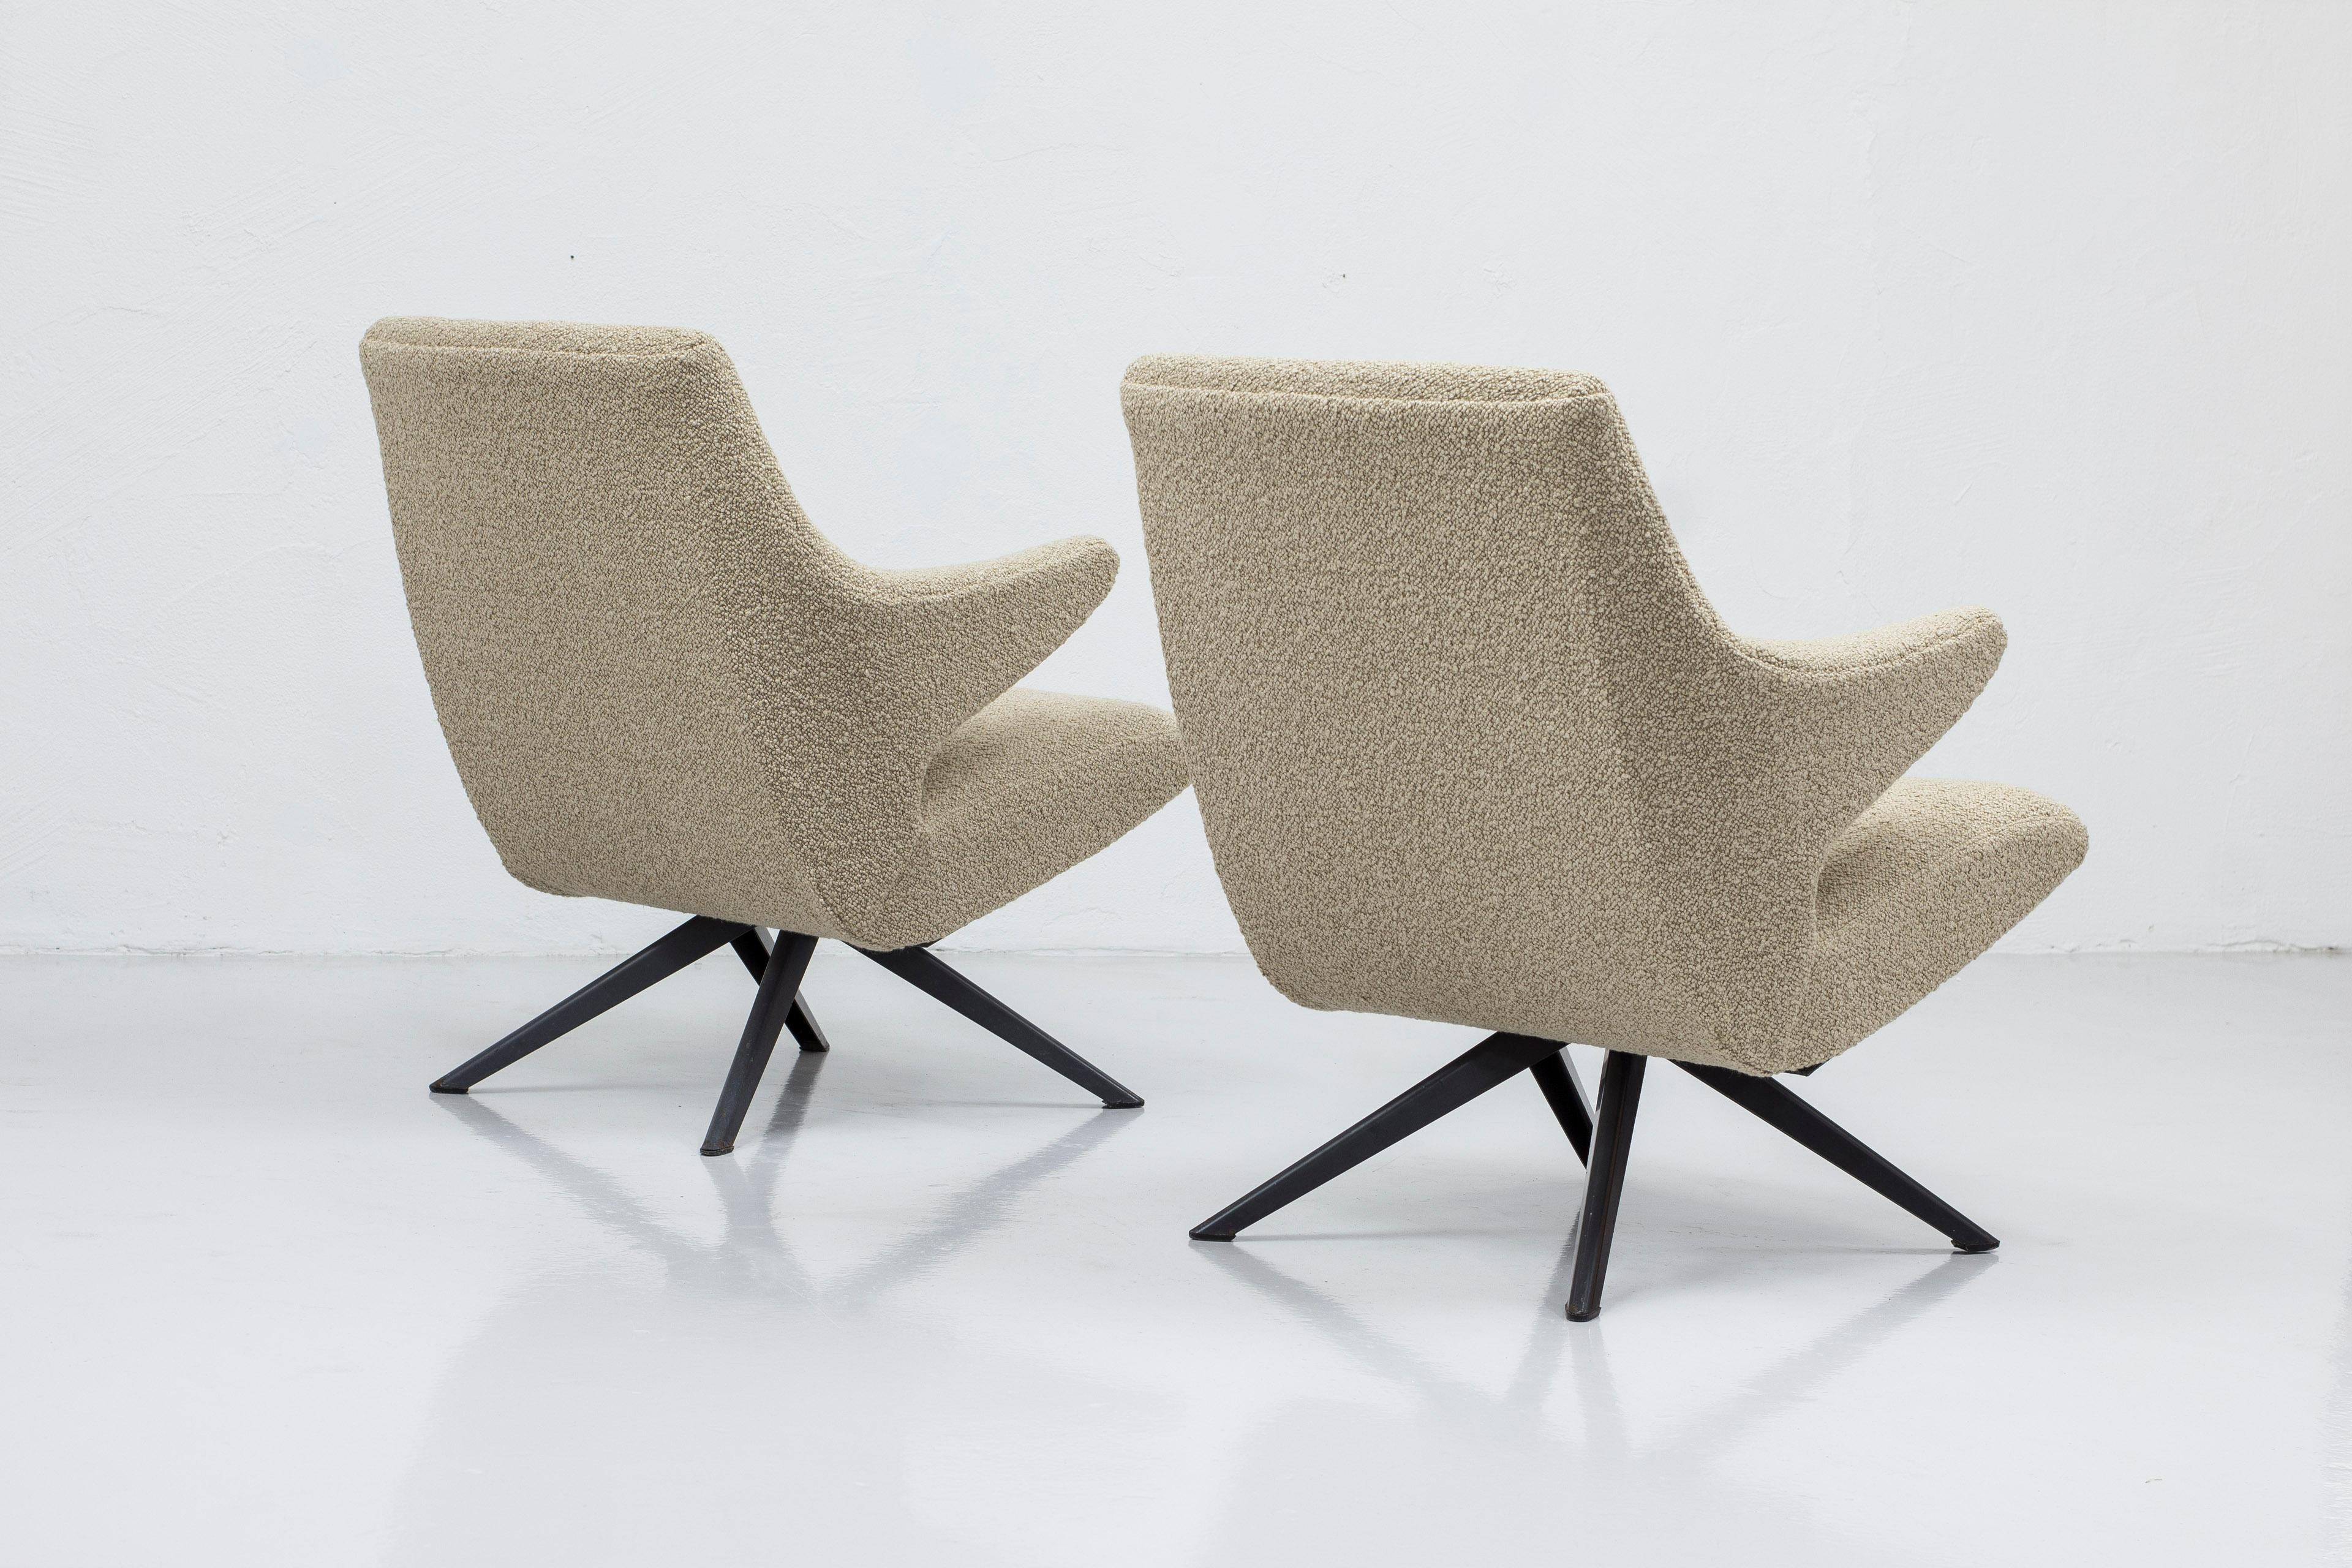 Cut Steel Pair of lounge chairs designed by Bengt Ruda by Nordiska Kompaniet, 1950 For Sale